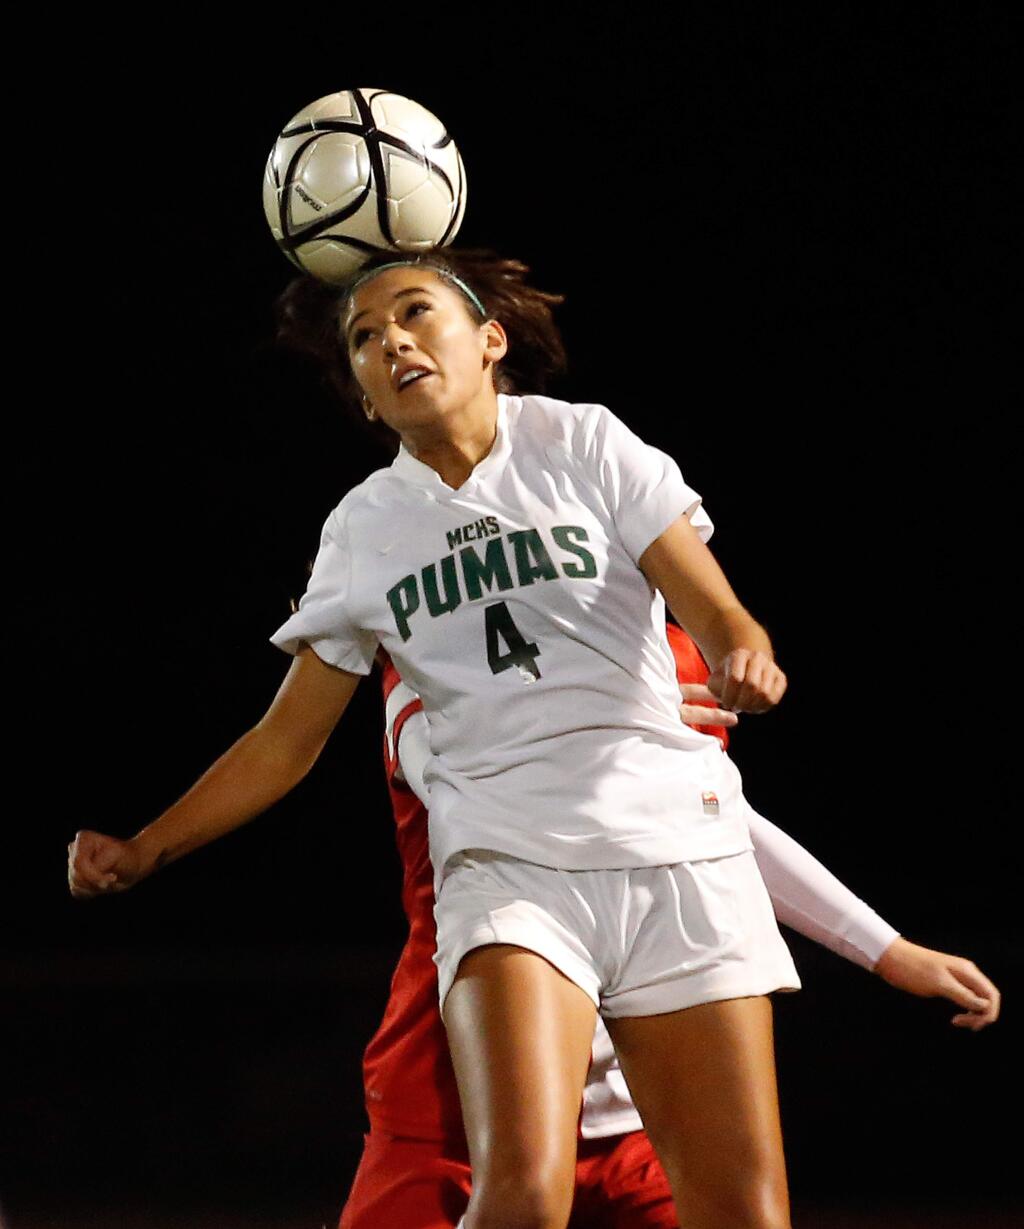 Maria Carrillo's Maddy Gonzalez (4) gets up for a header during the first half of the NCS Division 1 championship girls soccer match between Maria Carrillo and Montgomery high schools in Santa Rosa, California on Saturday, November 14, 2015. (Alvin Jornada / The Press Democrat)